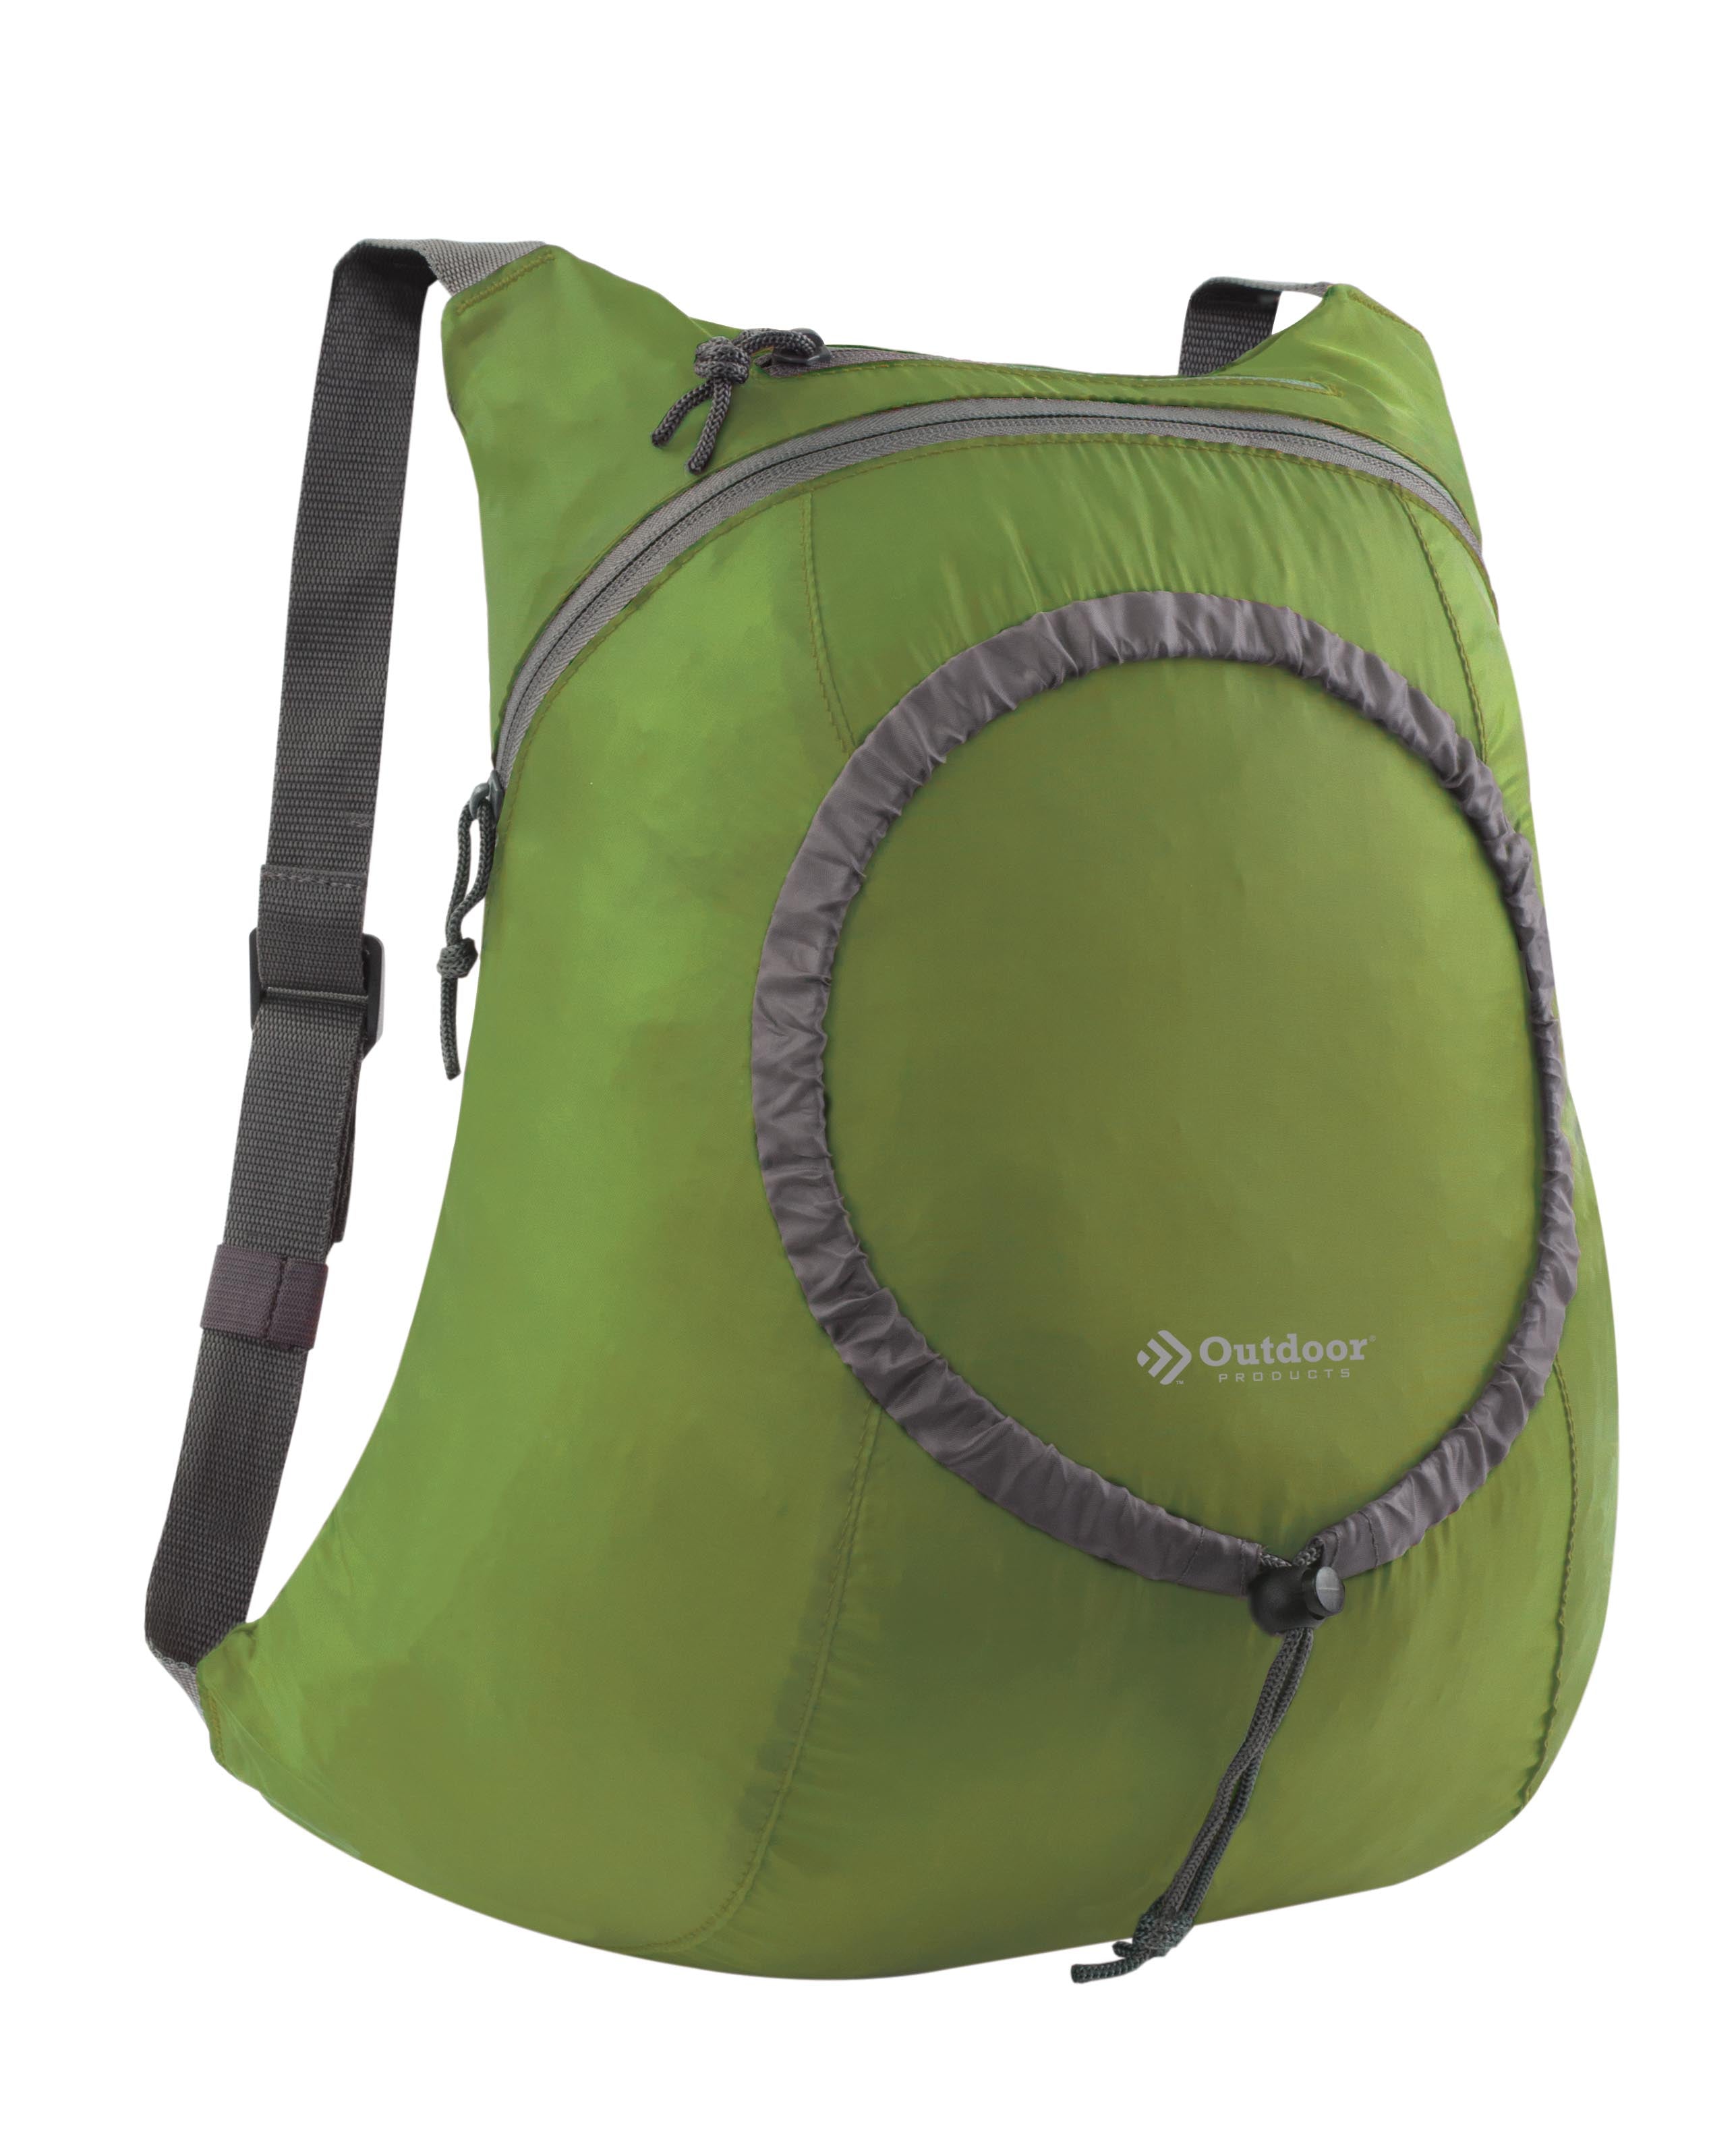 Packable Day Pack, 14.9-Liter Storage – Outdoor Products